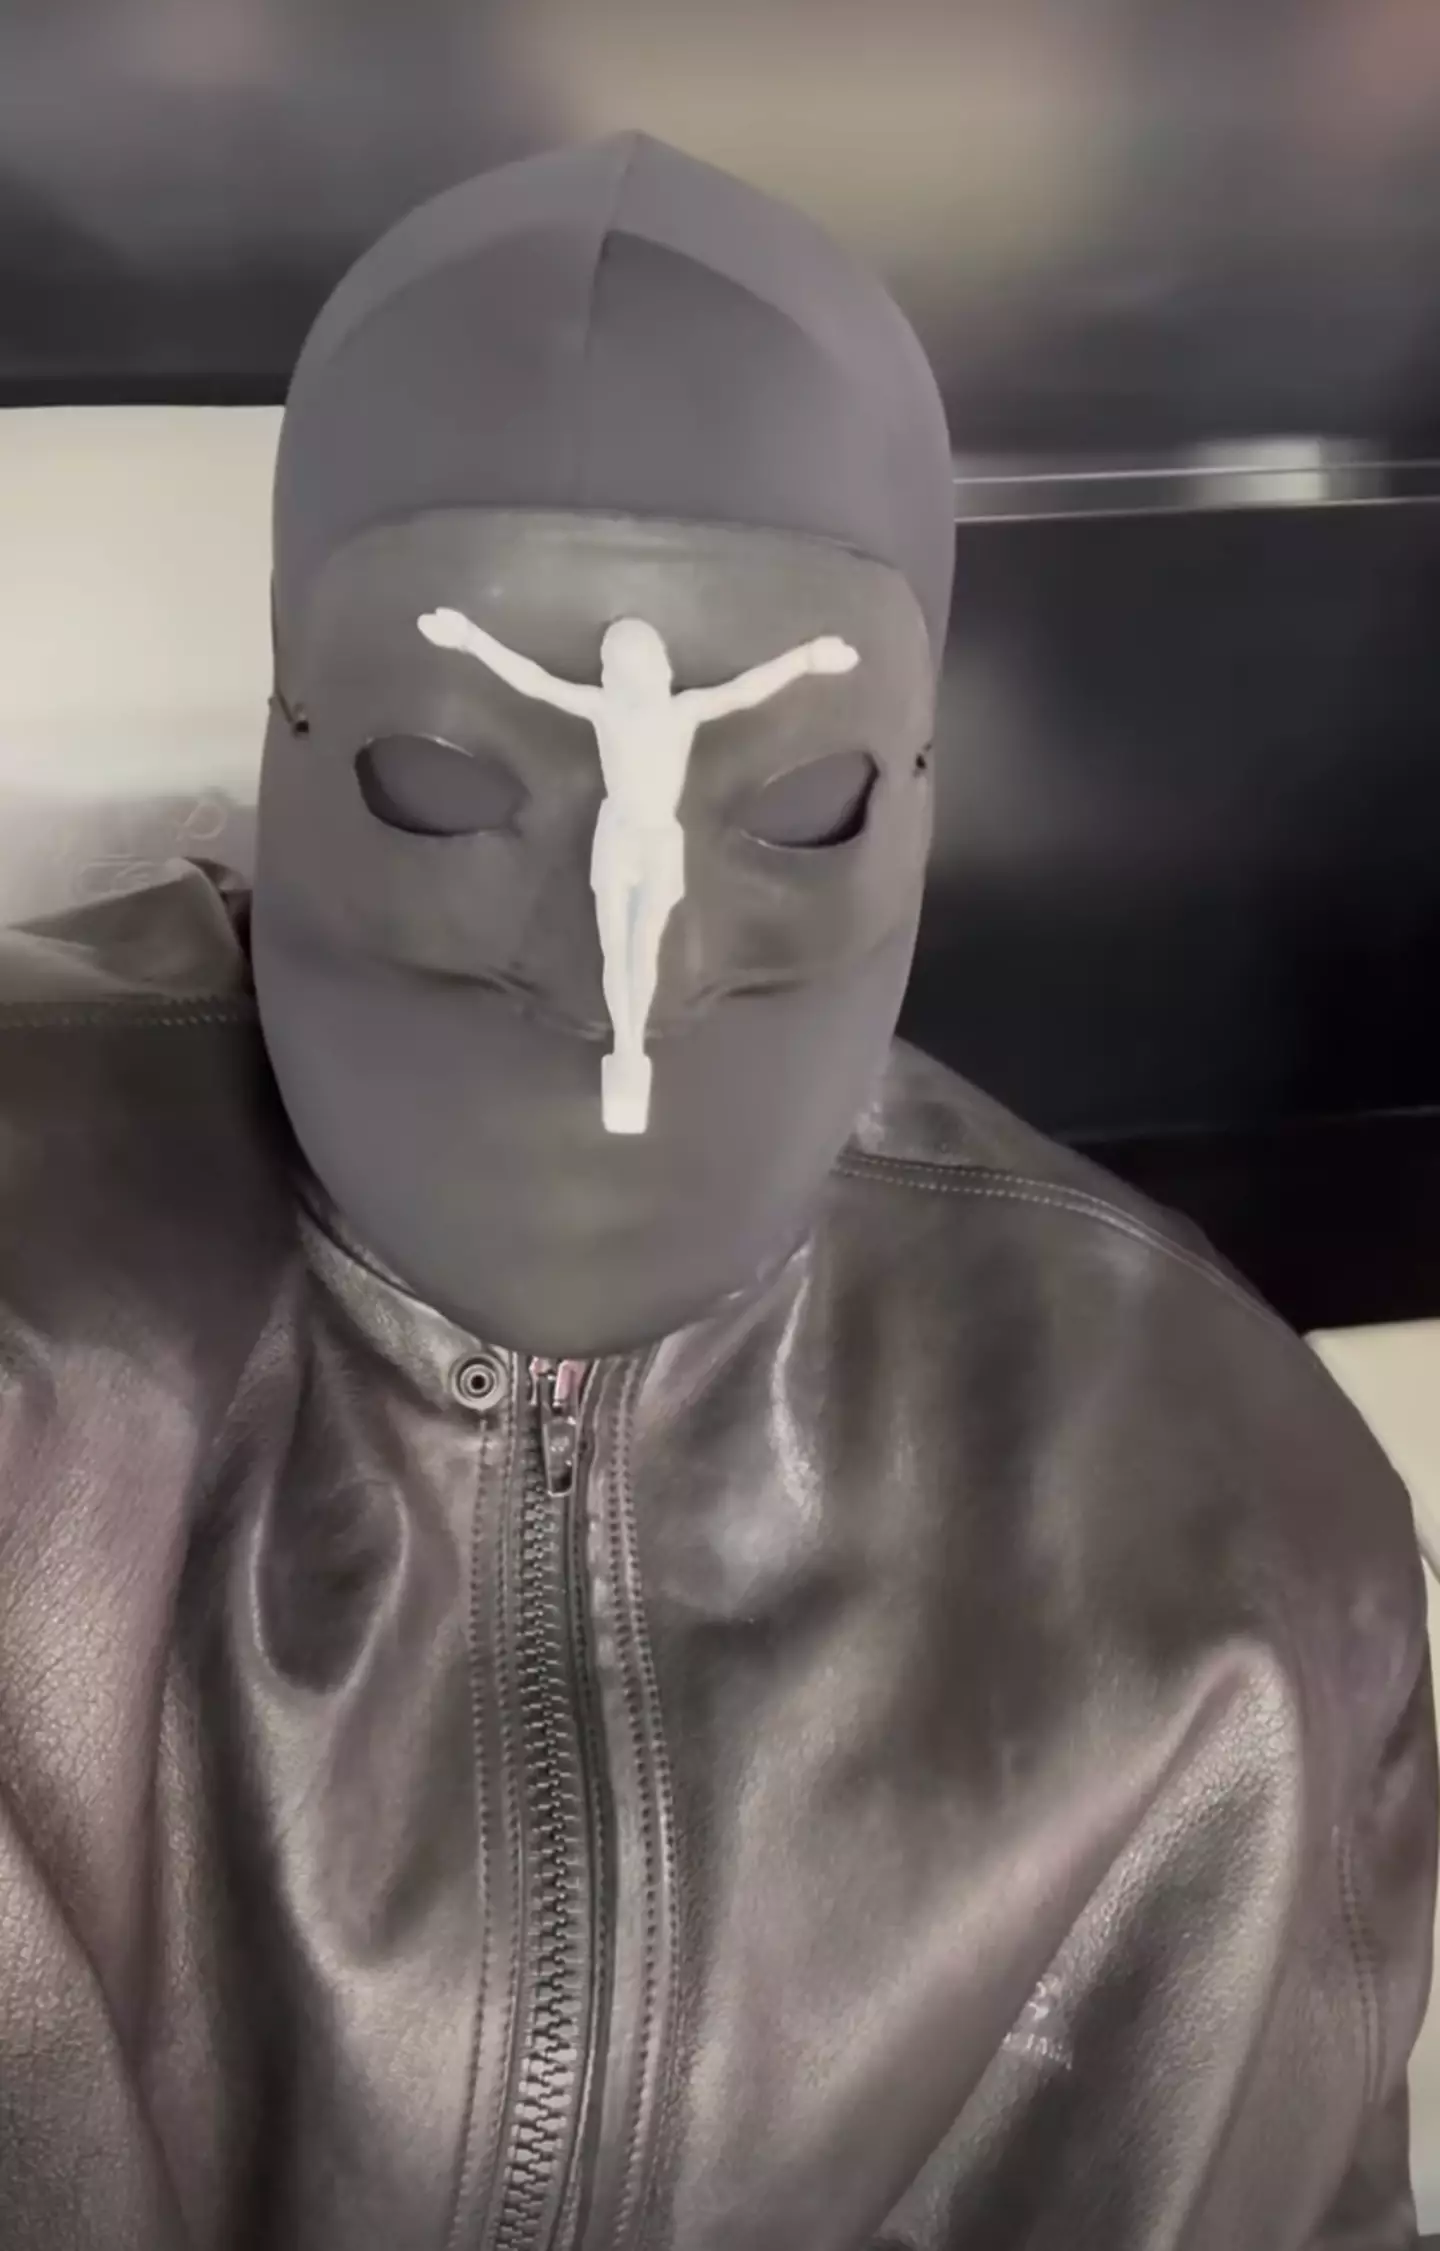 The rapper wore a full mask to attend the Super Bowl on Sunday.